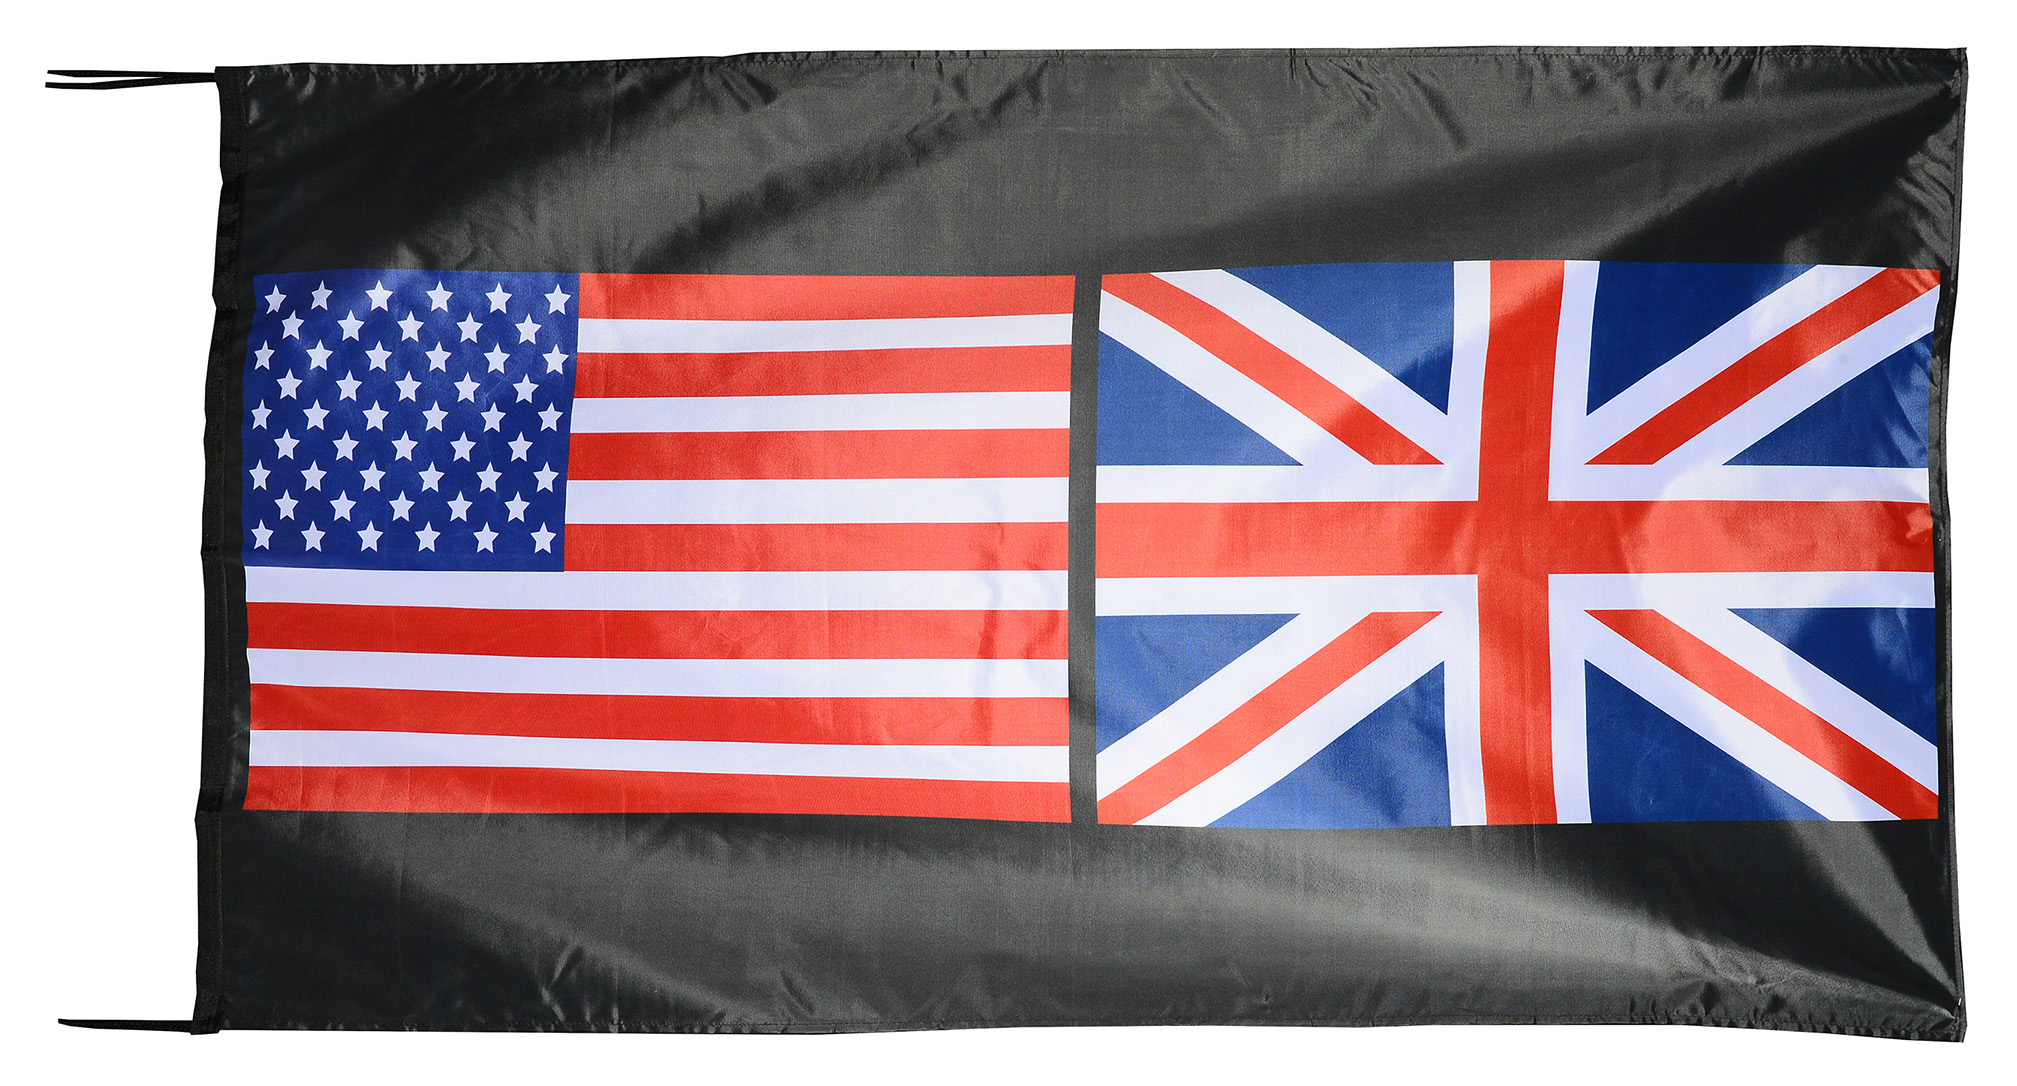 Flag  011 USA / US Country / United States Of America and New York State / American Patriotic / Pride Hybrid Weather-Resistant Polyester Outdoor Flag Landscape Banner / Vivid Colors / 3 X 5 FT (150 x 90cm) International Flags for Sale